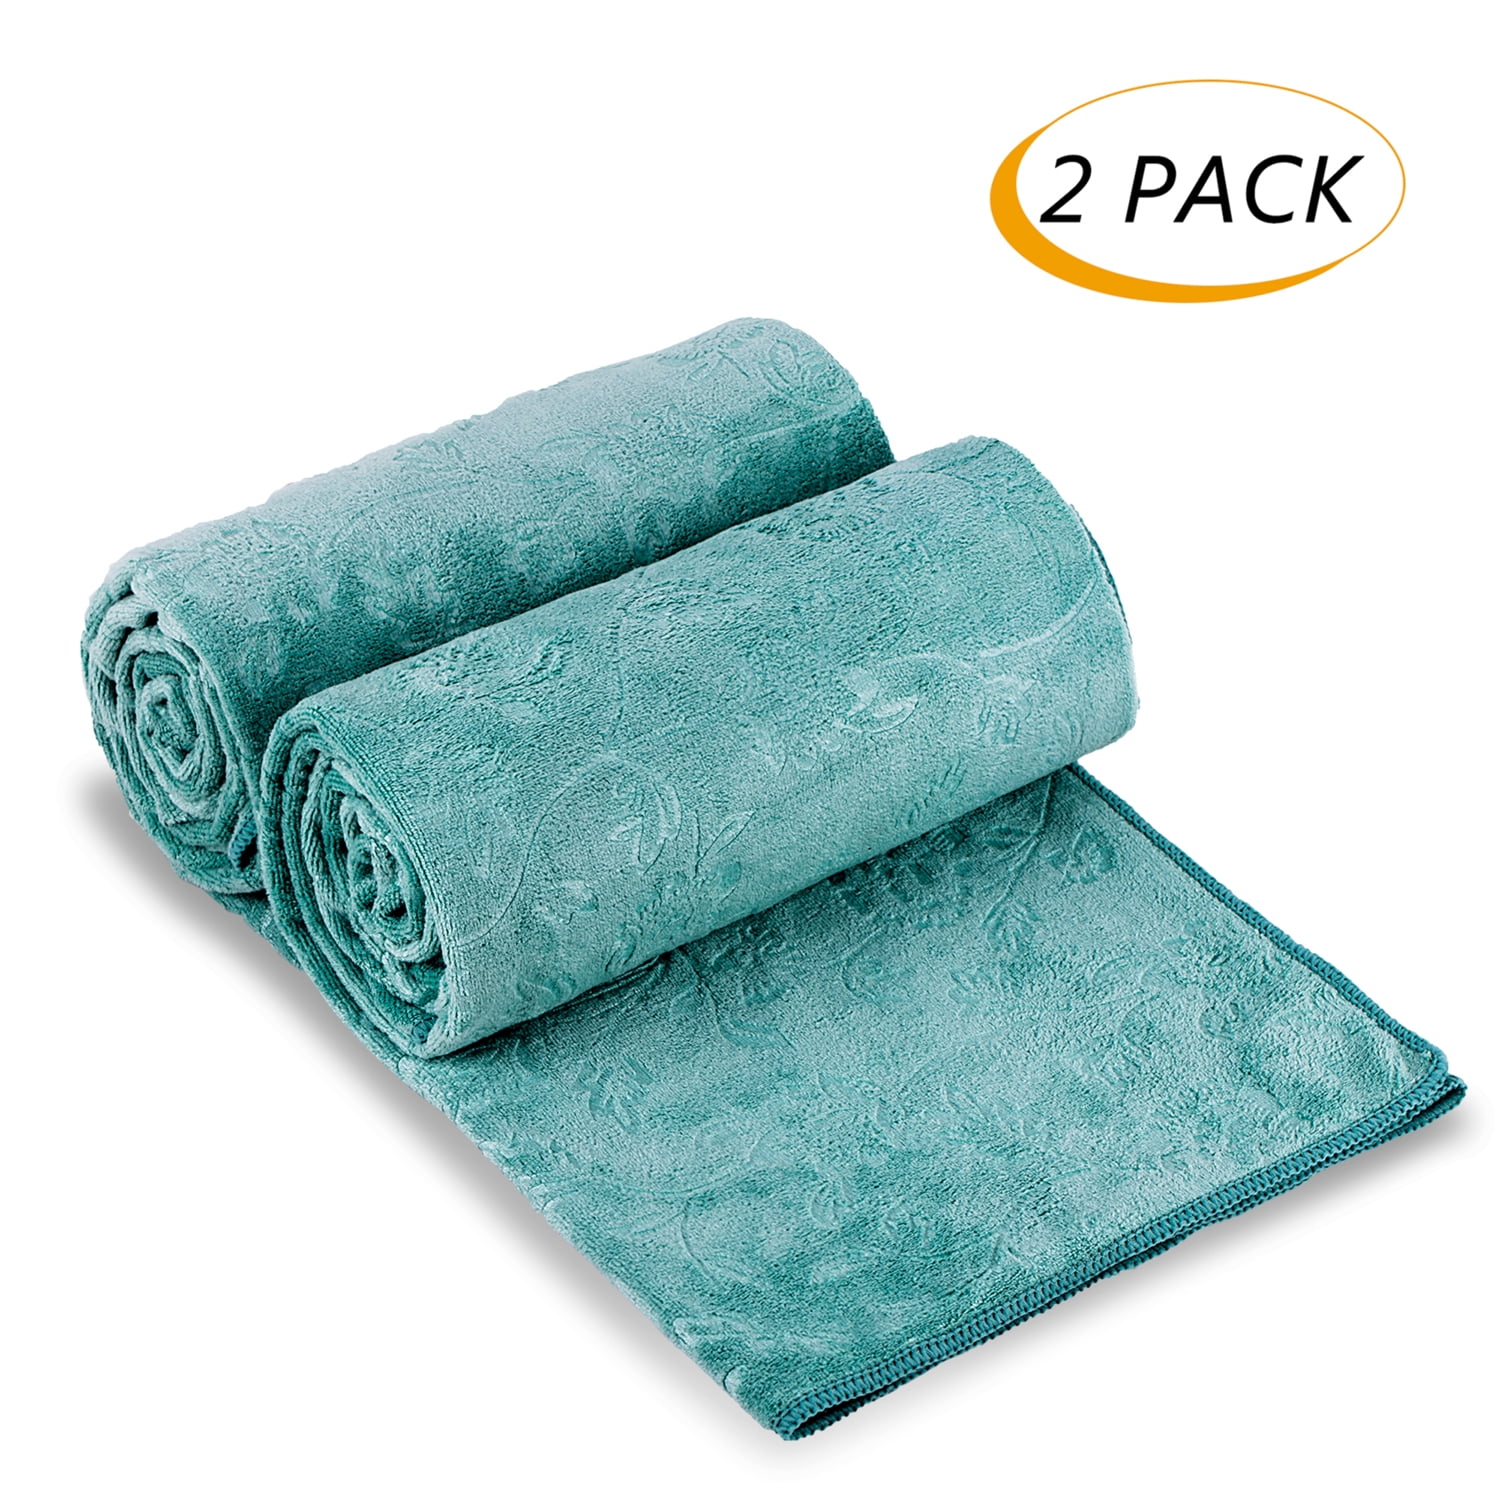 JML Luxury Hotel & SPA Bath Towels (2 Pack, 30x60) - 350GSM High Density  Fleece Towel Sets - Super Soft and Absorbent, Lint Free, Fade Resistant